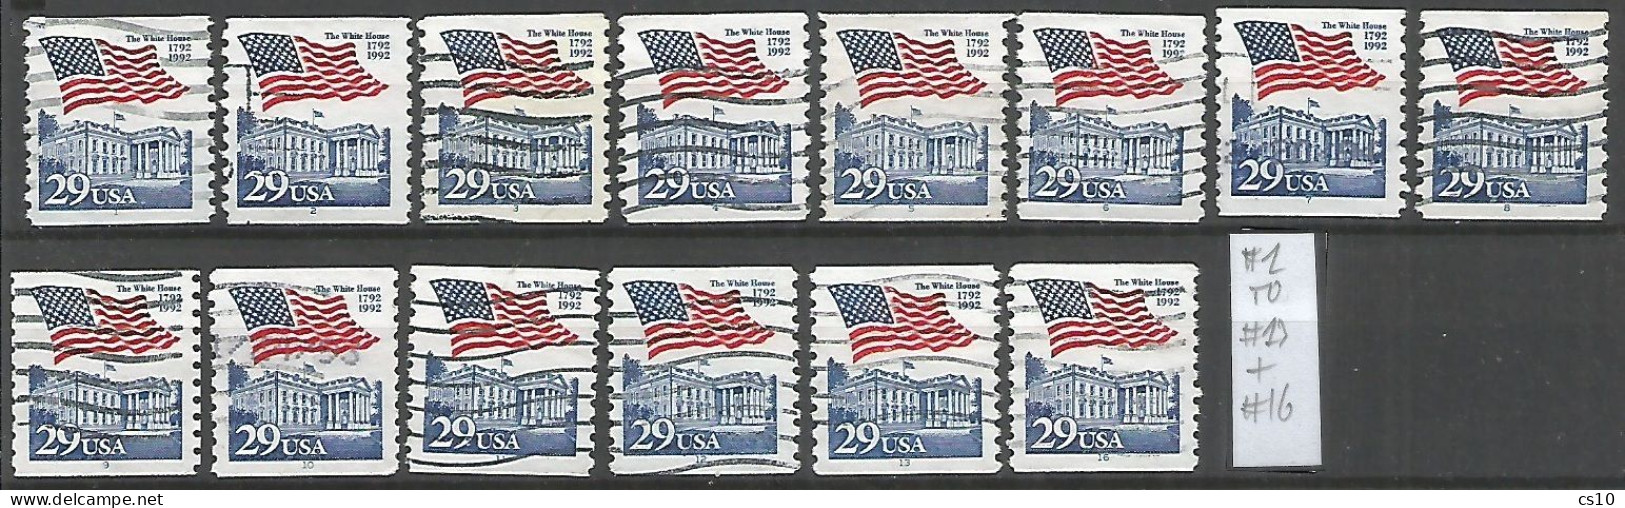 USA 1992 Flag Over White House C.29 COIL Used SC.# 2609 Wide Series Of Plate Numbers From 1 To 13 + 16 !!! - Coils & Coil Singles